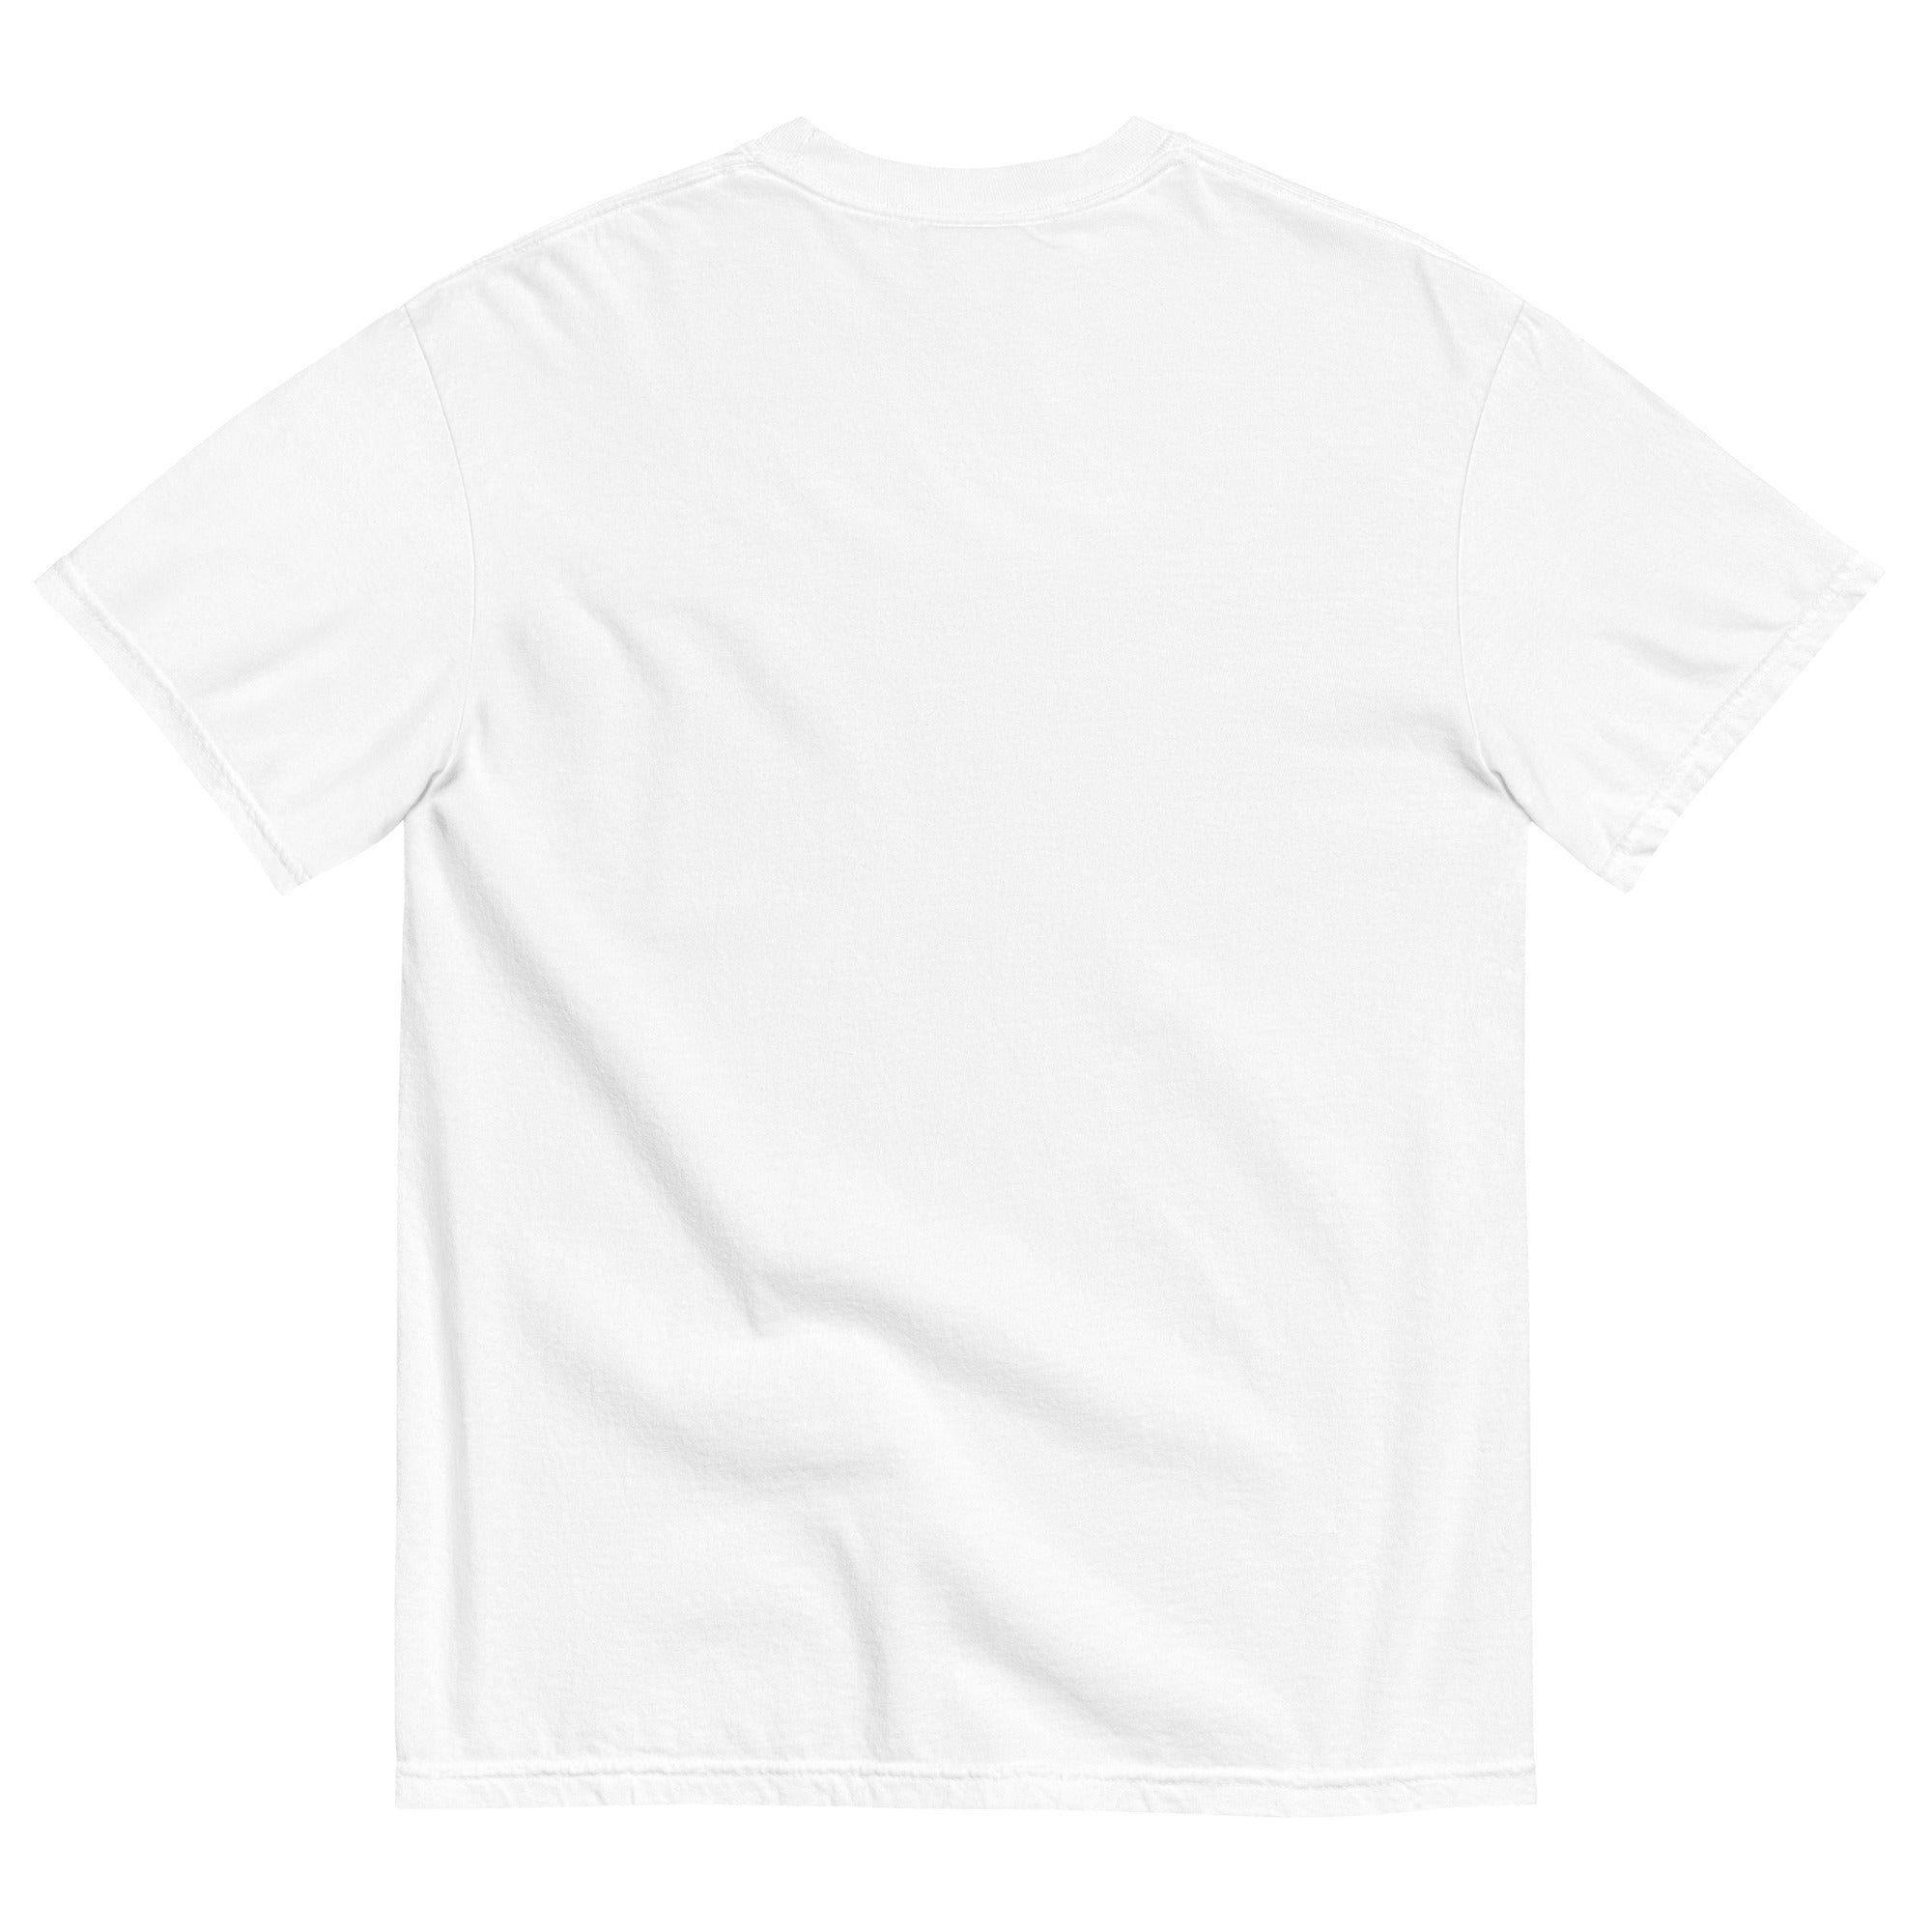 Vintage Relaxed Fit T-Shirt - New York, NY